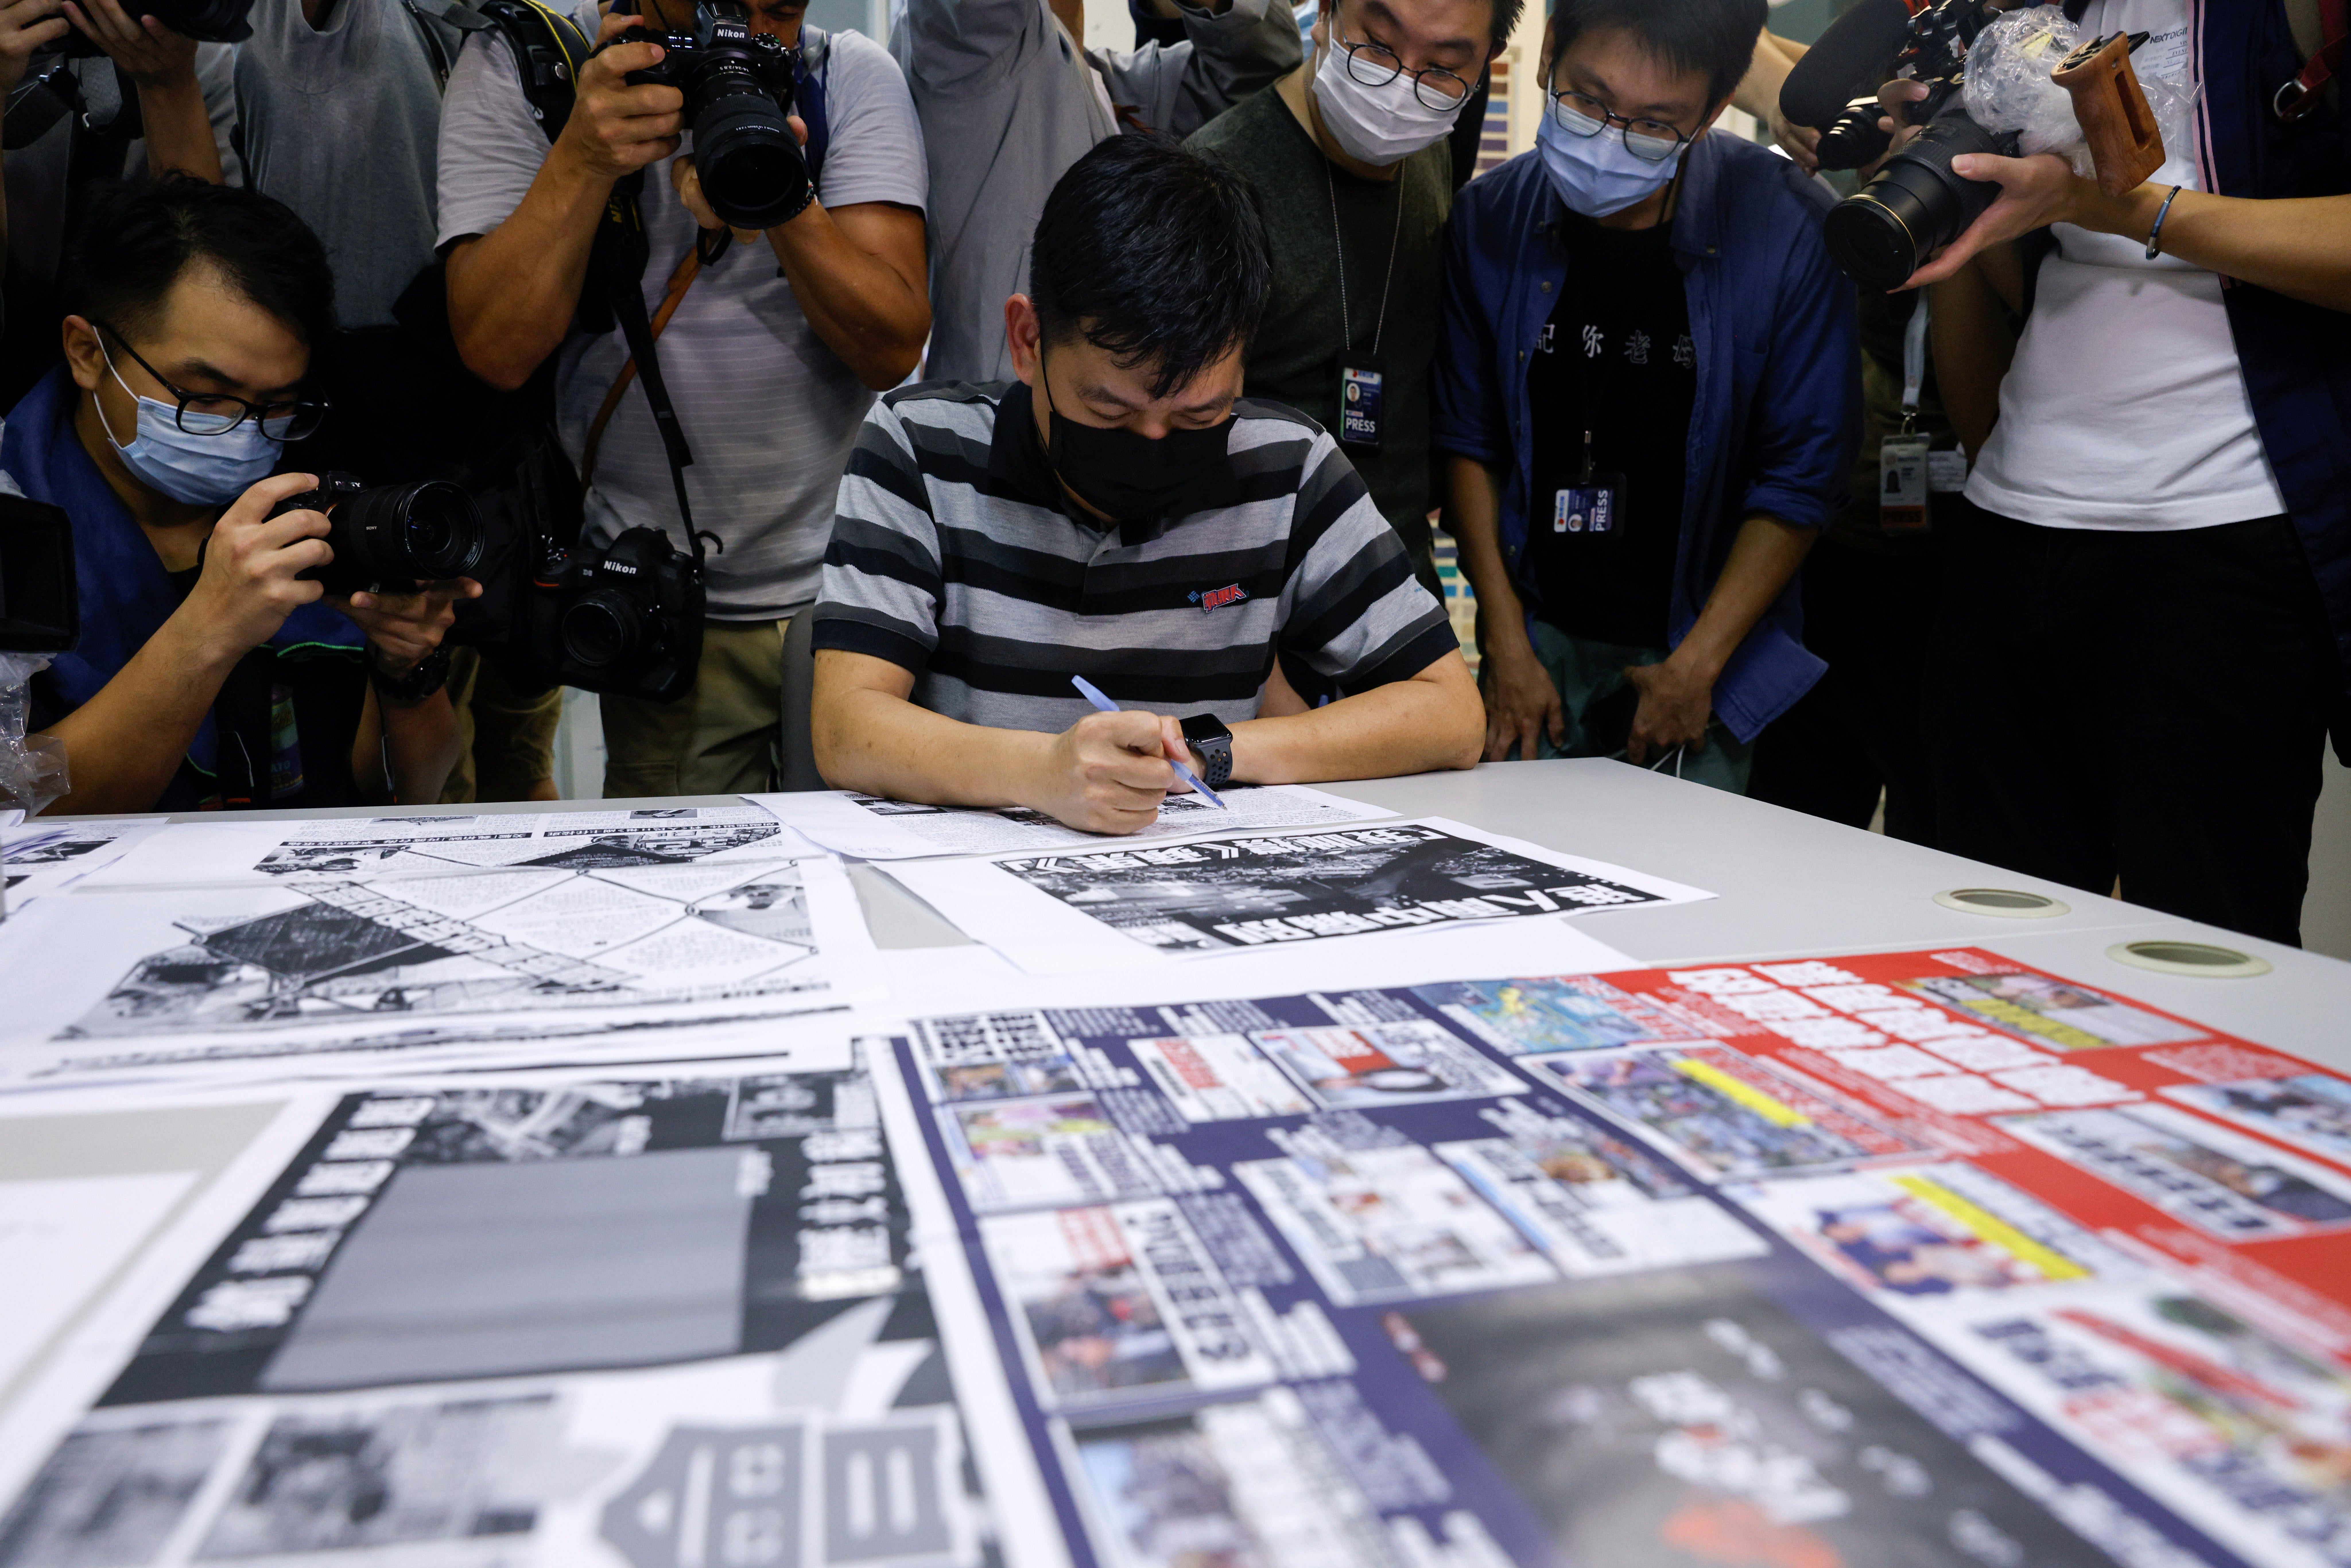 Lam Man-Chung, executive editor-in-chief of Apple Daily, works on the final edition of the newspaper